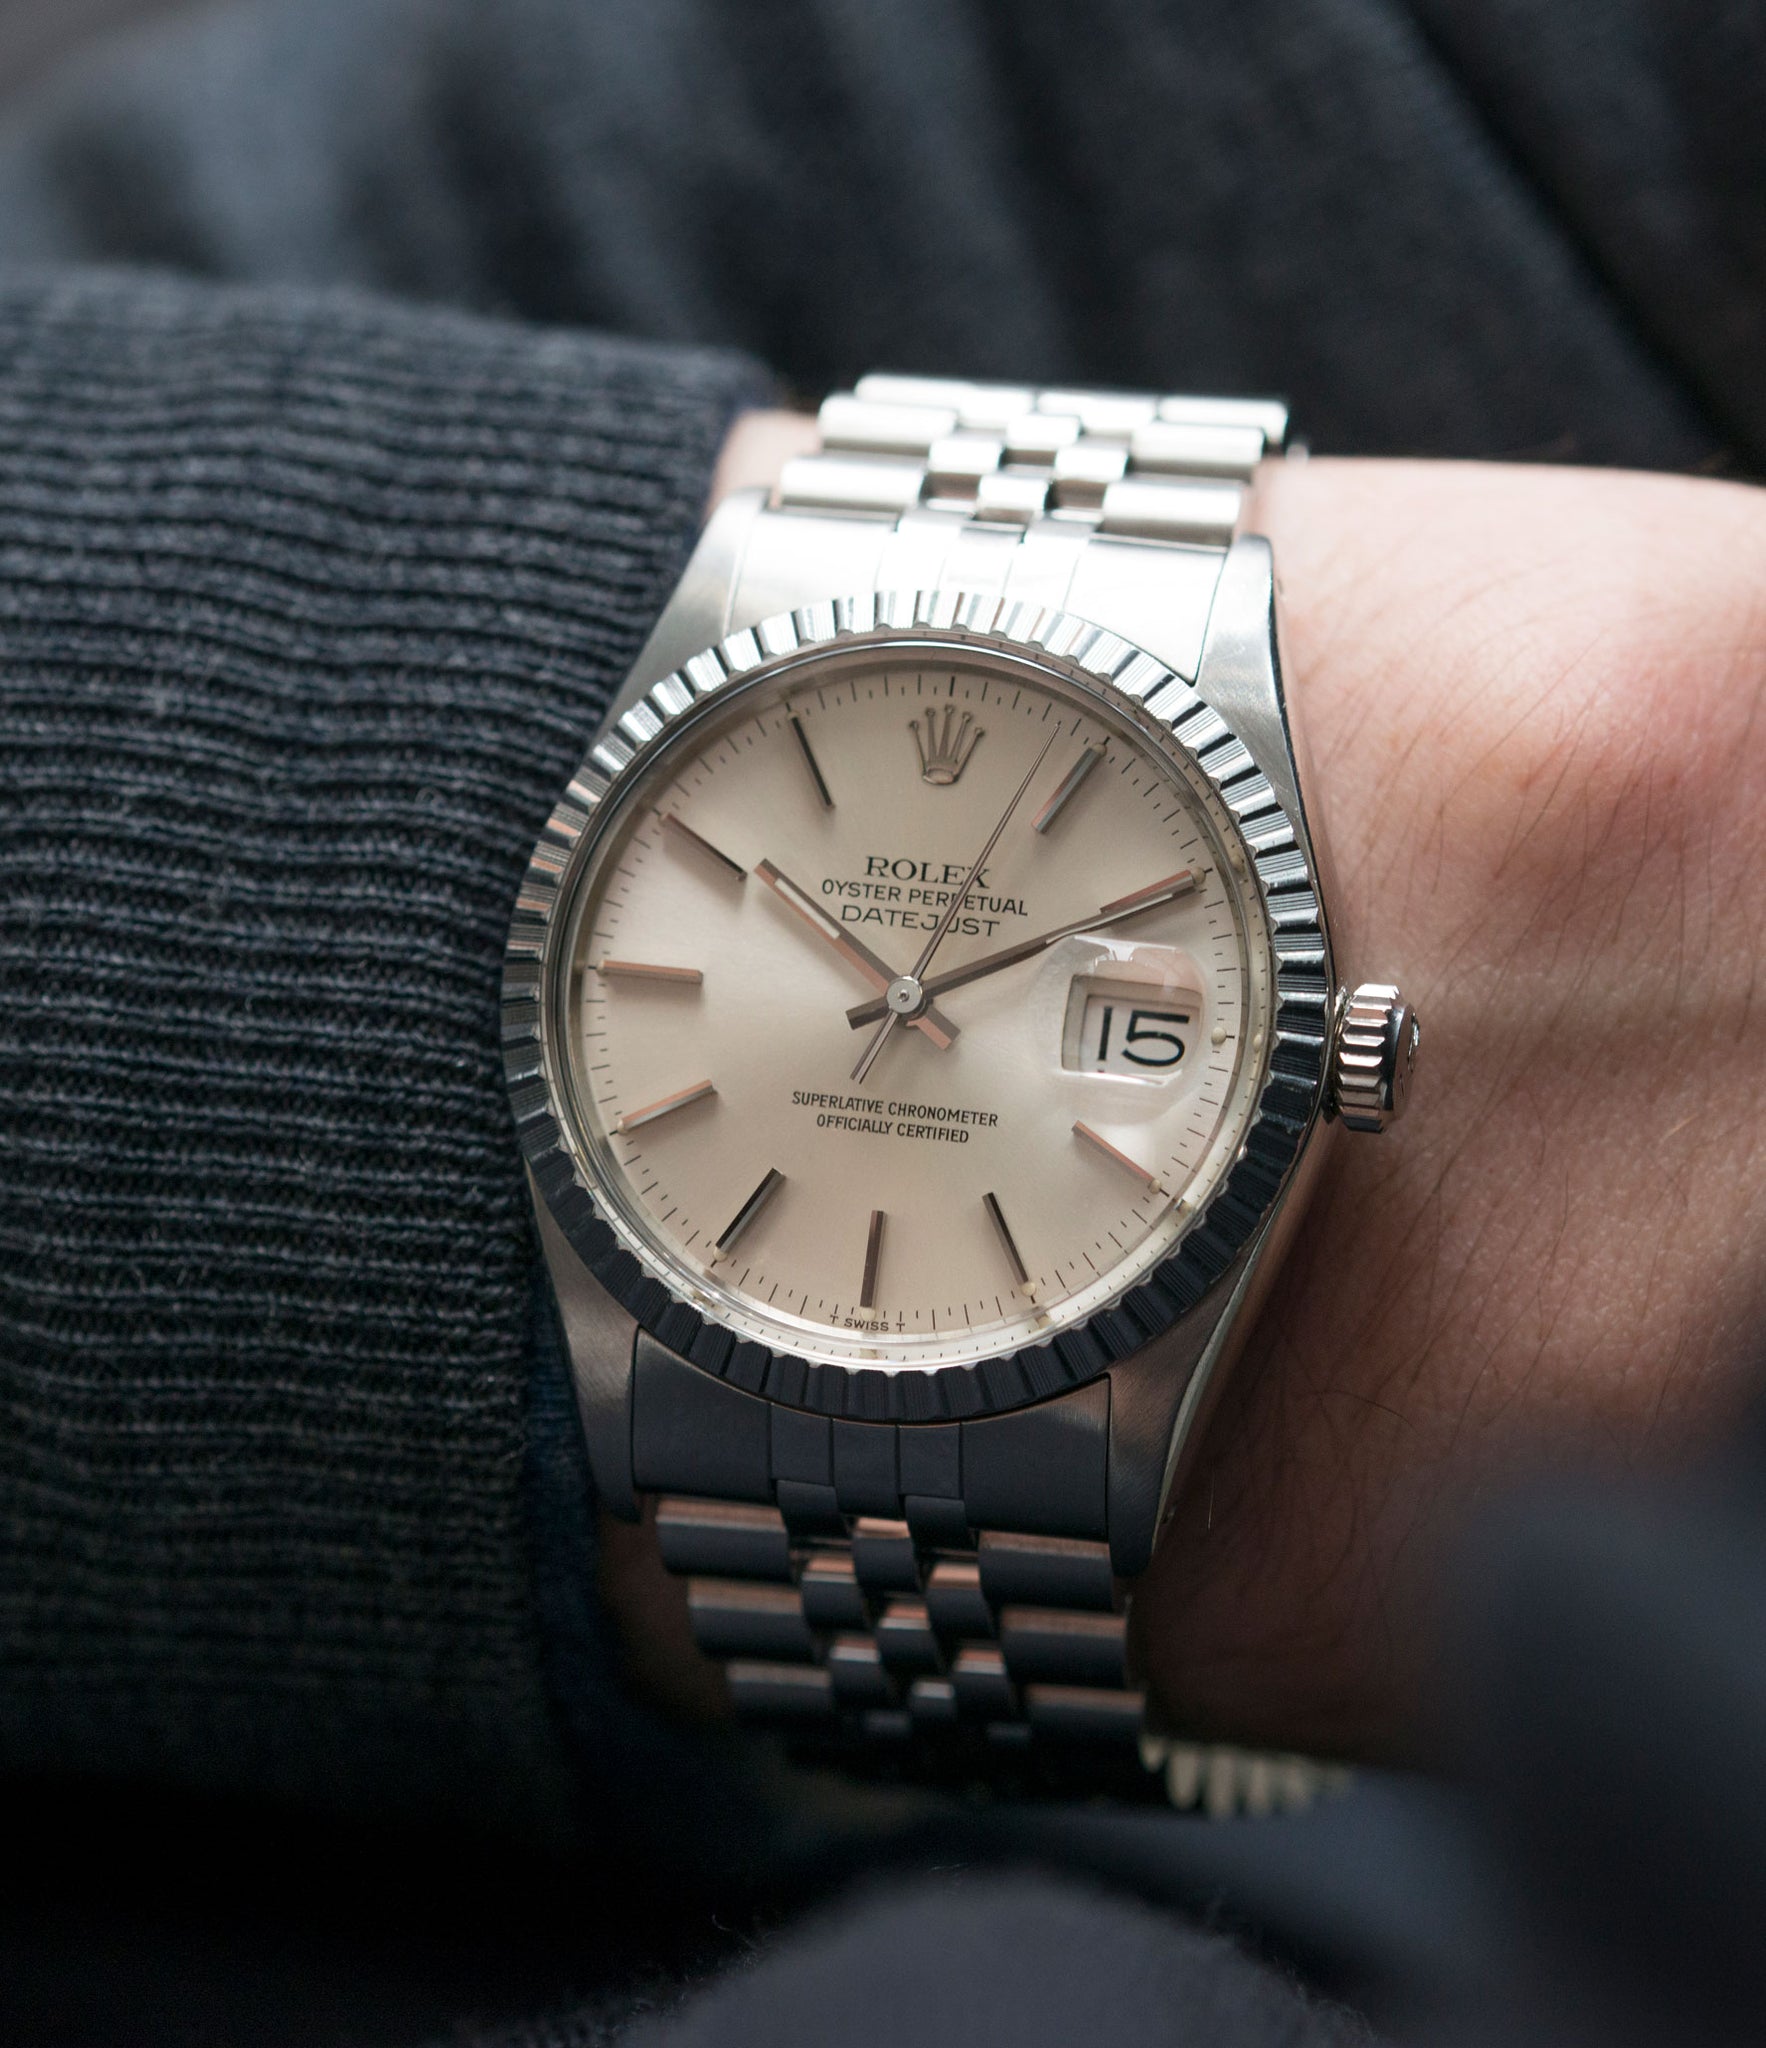 on the wrist Rolex Oyster Perpetual Datejust 16030 steel automatic silver dial watch Jubilee bracelet for sale online at A Collected Man London UK vintage watch specialist